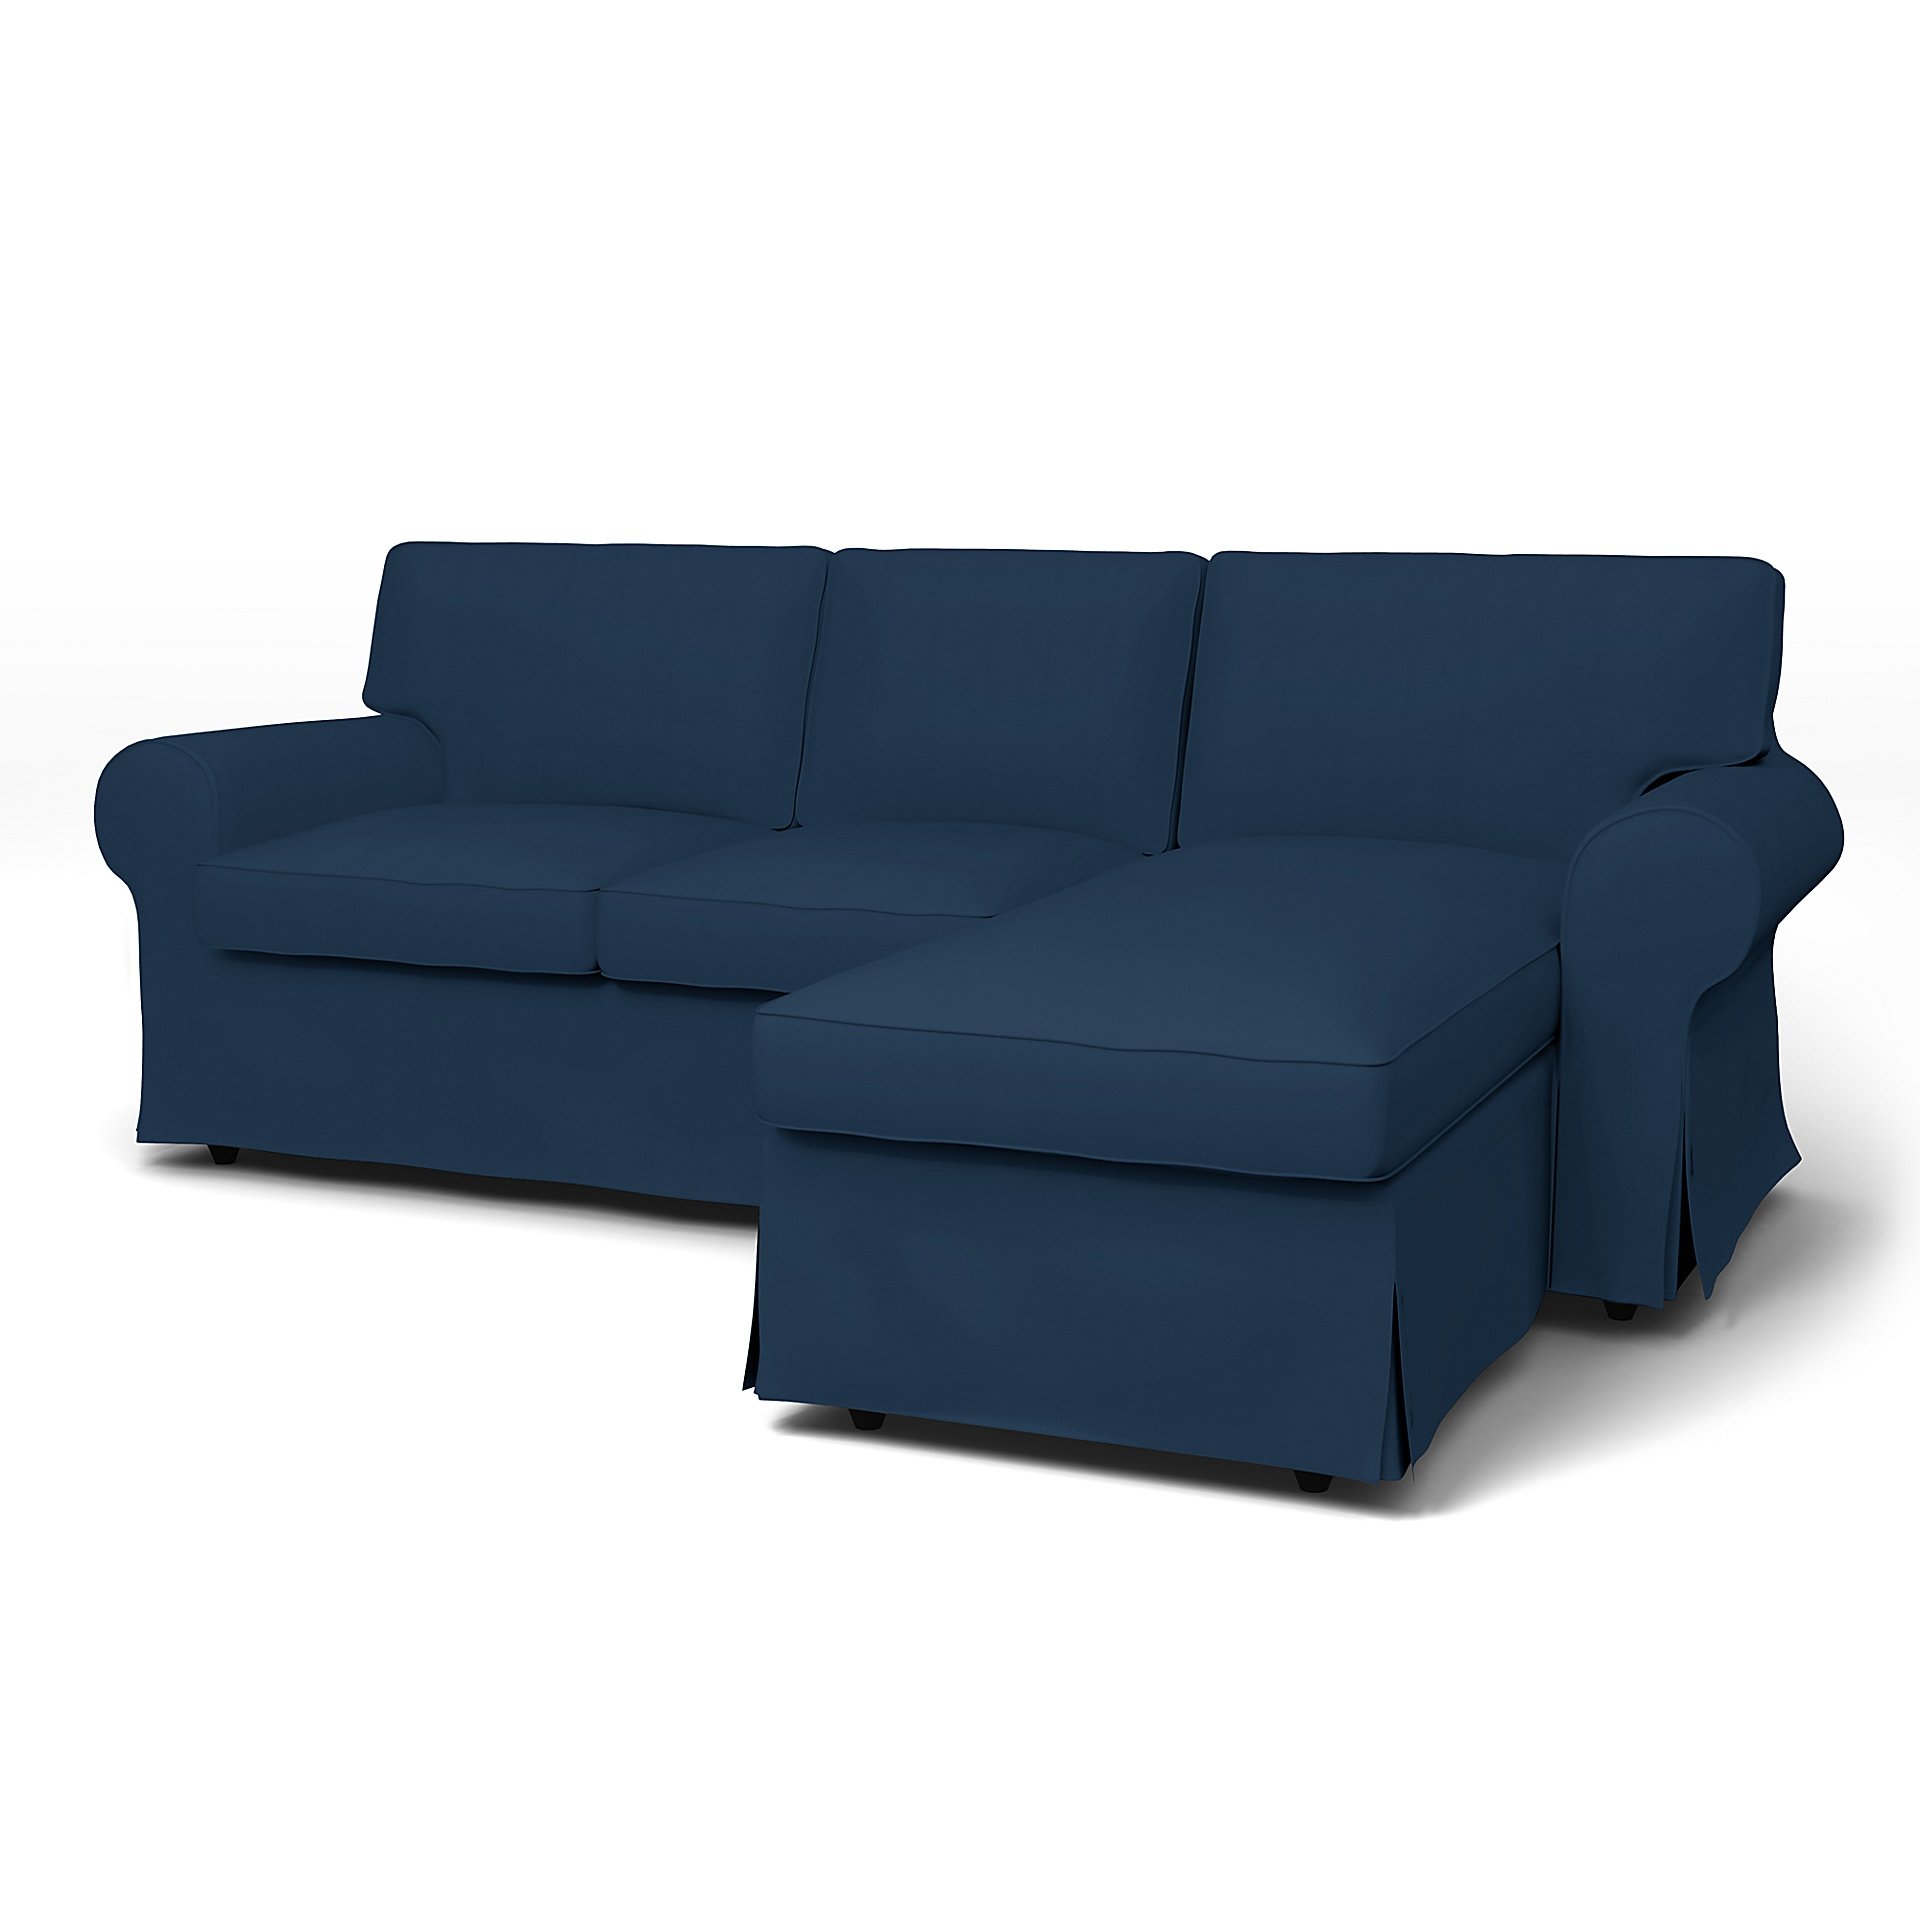 IKEA - Ektorp 3 Seater Sofa with Chaise Cover, Deep Navy Blue, Cotton - Bemz